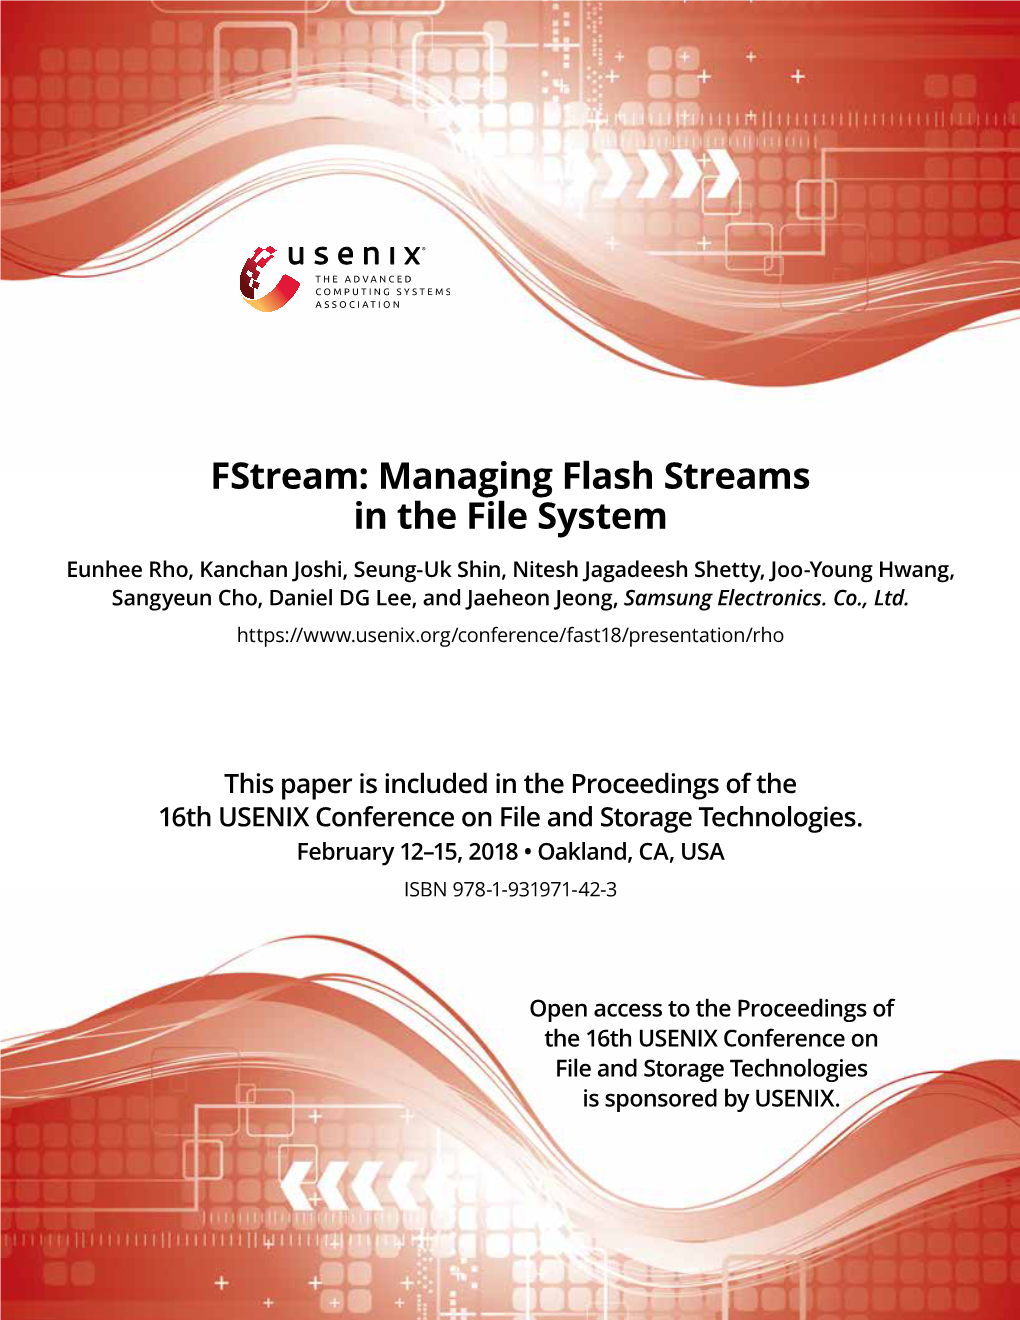 Fstream: Managing Flash Streams in the File System